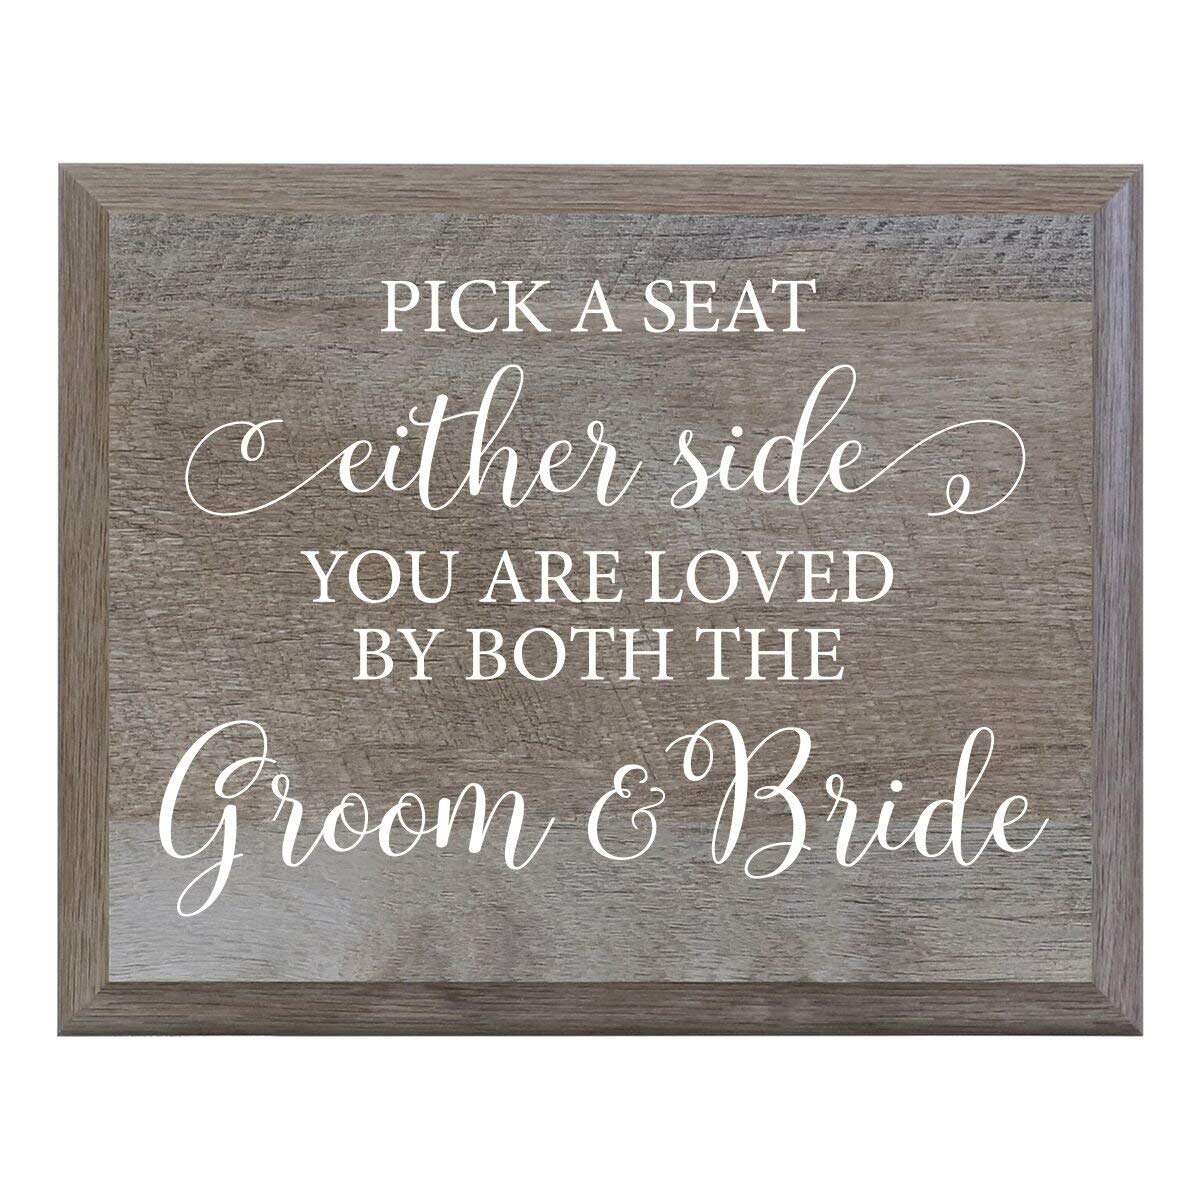 Pick a Seat Not a Side. You Are Loved by Both Groom and Bride